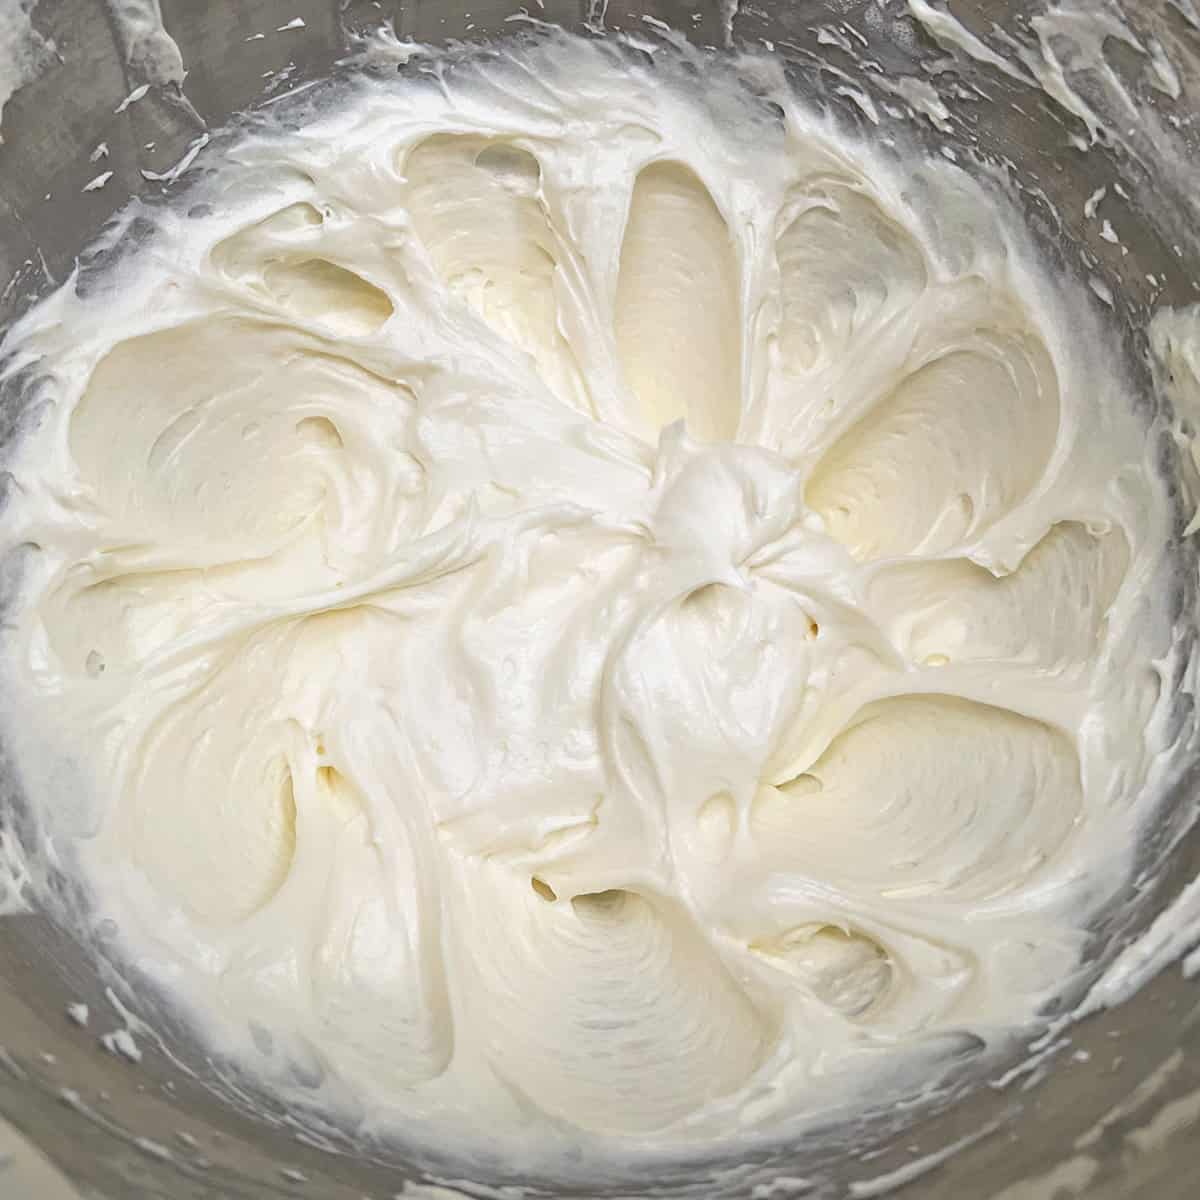 Maple cream cheese frosting in a mixer bowl.